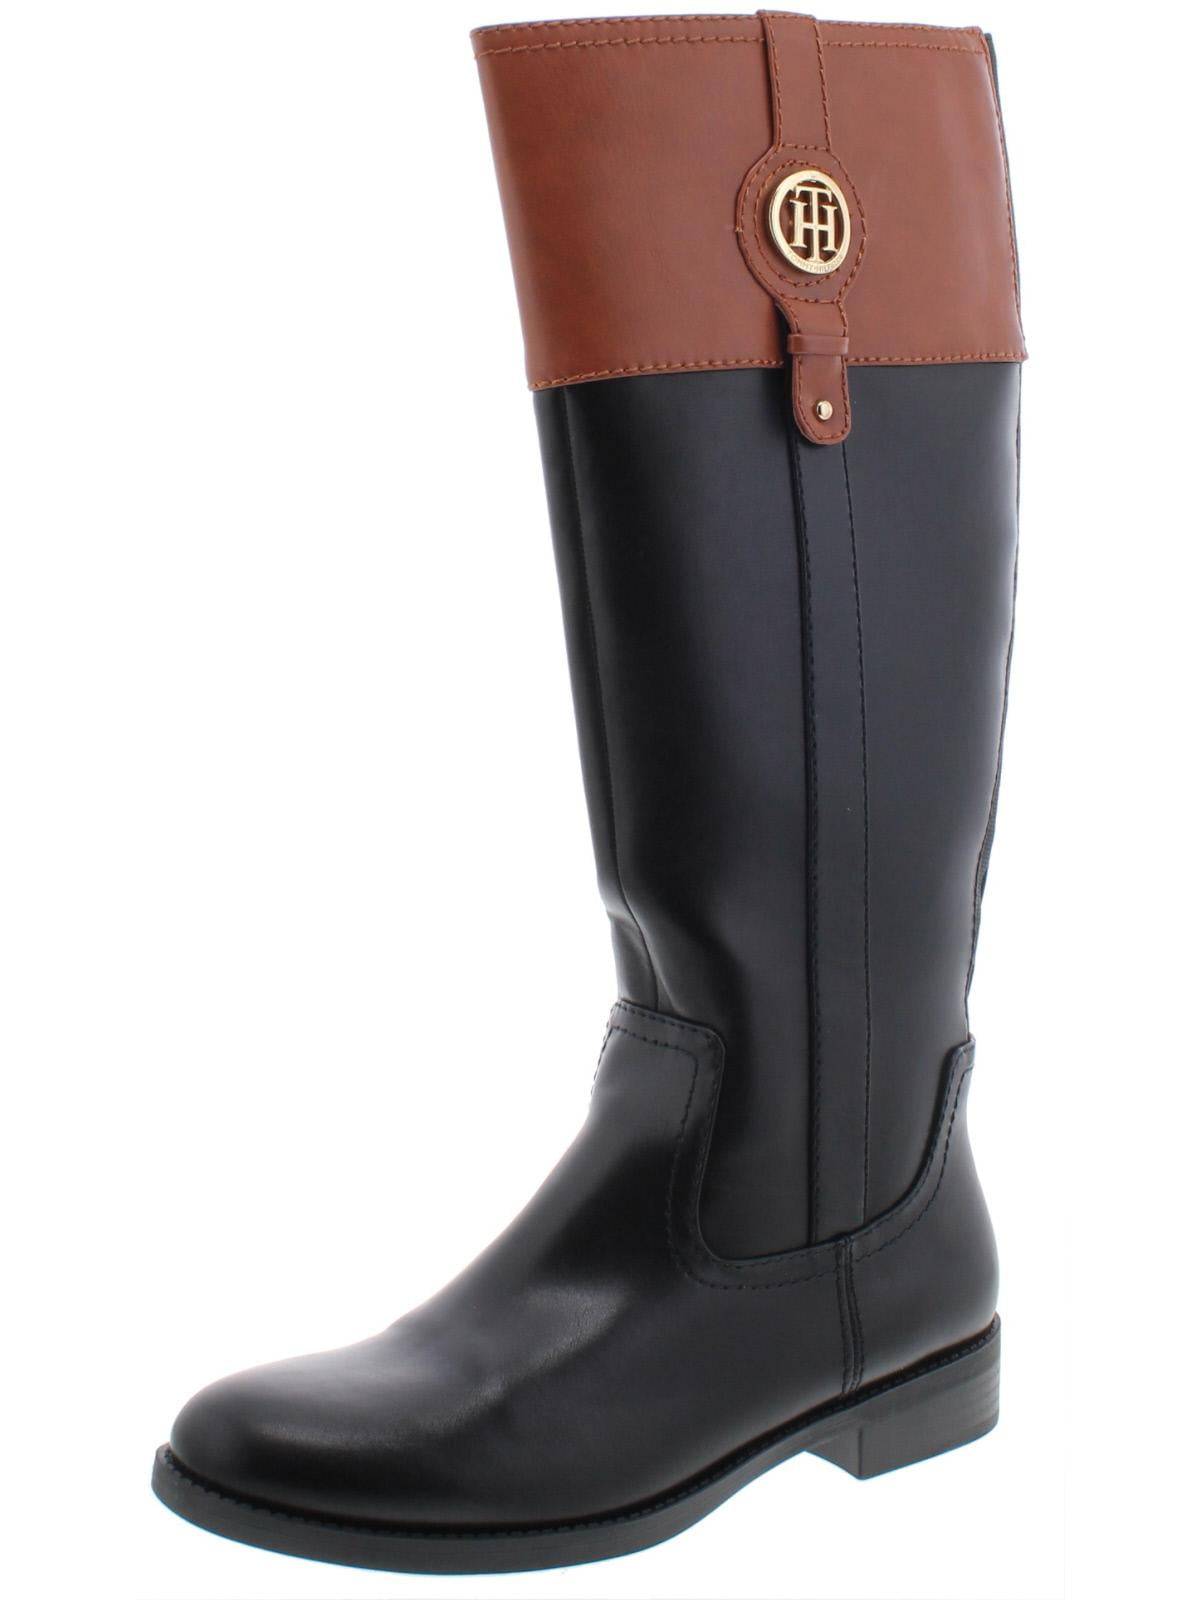 Tommy Hilfiger Women's Imina 3 Faux Leather Knee High Riding Boots ...